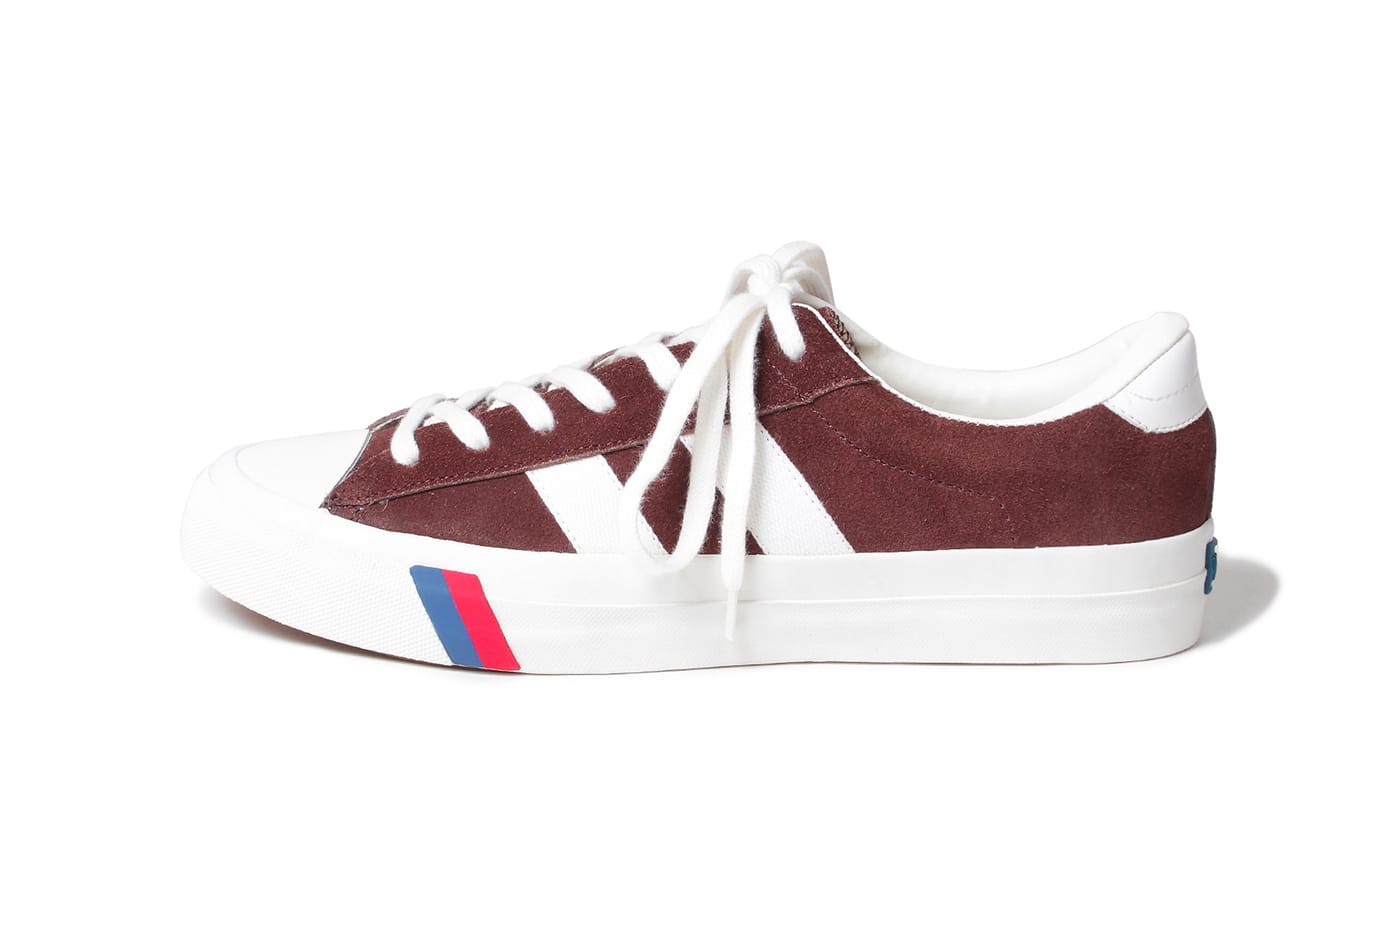 classic pro keds sneakers